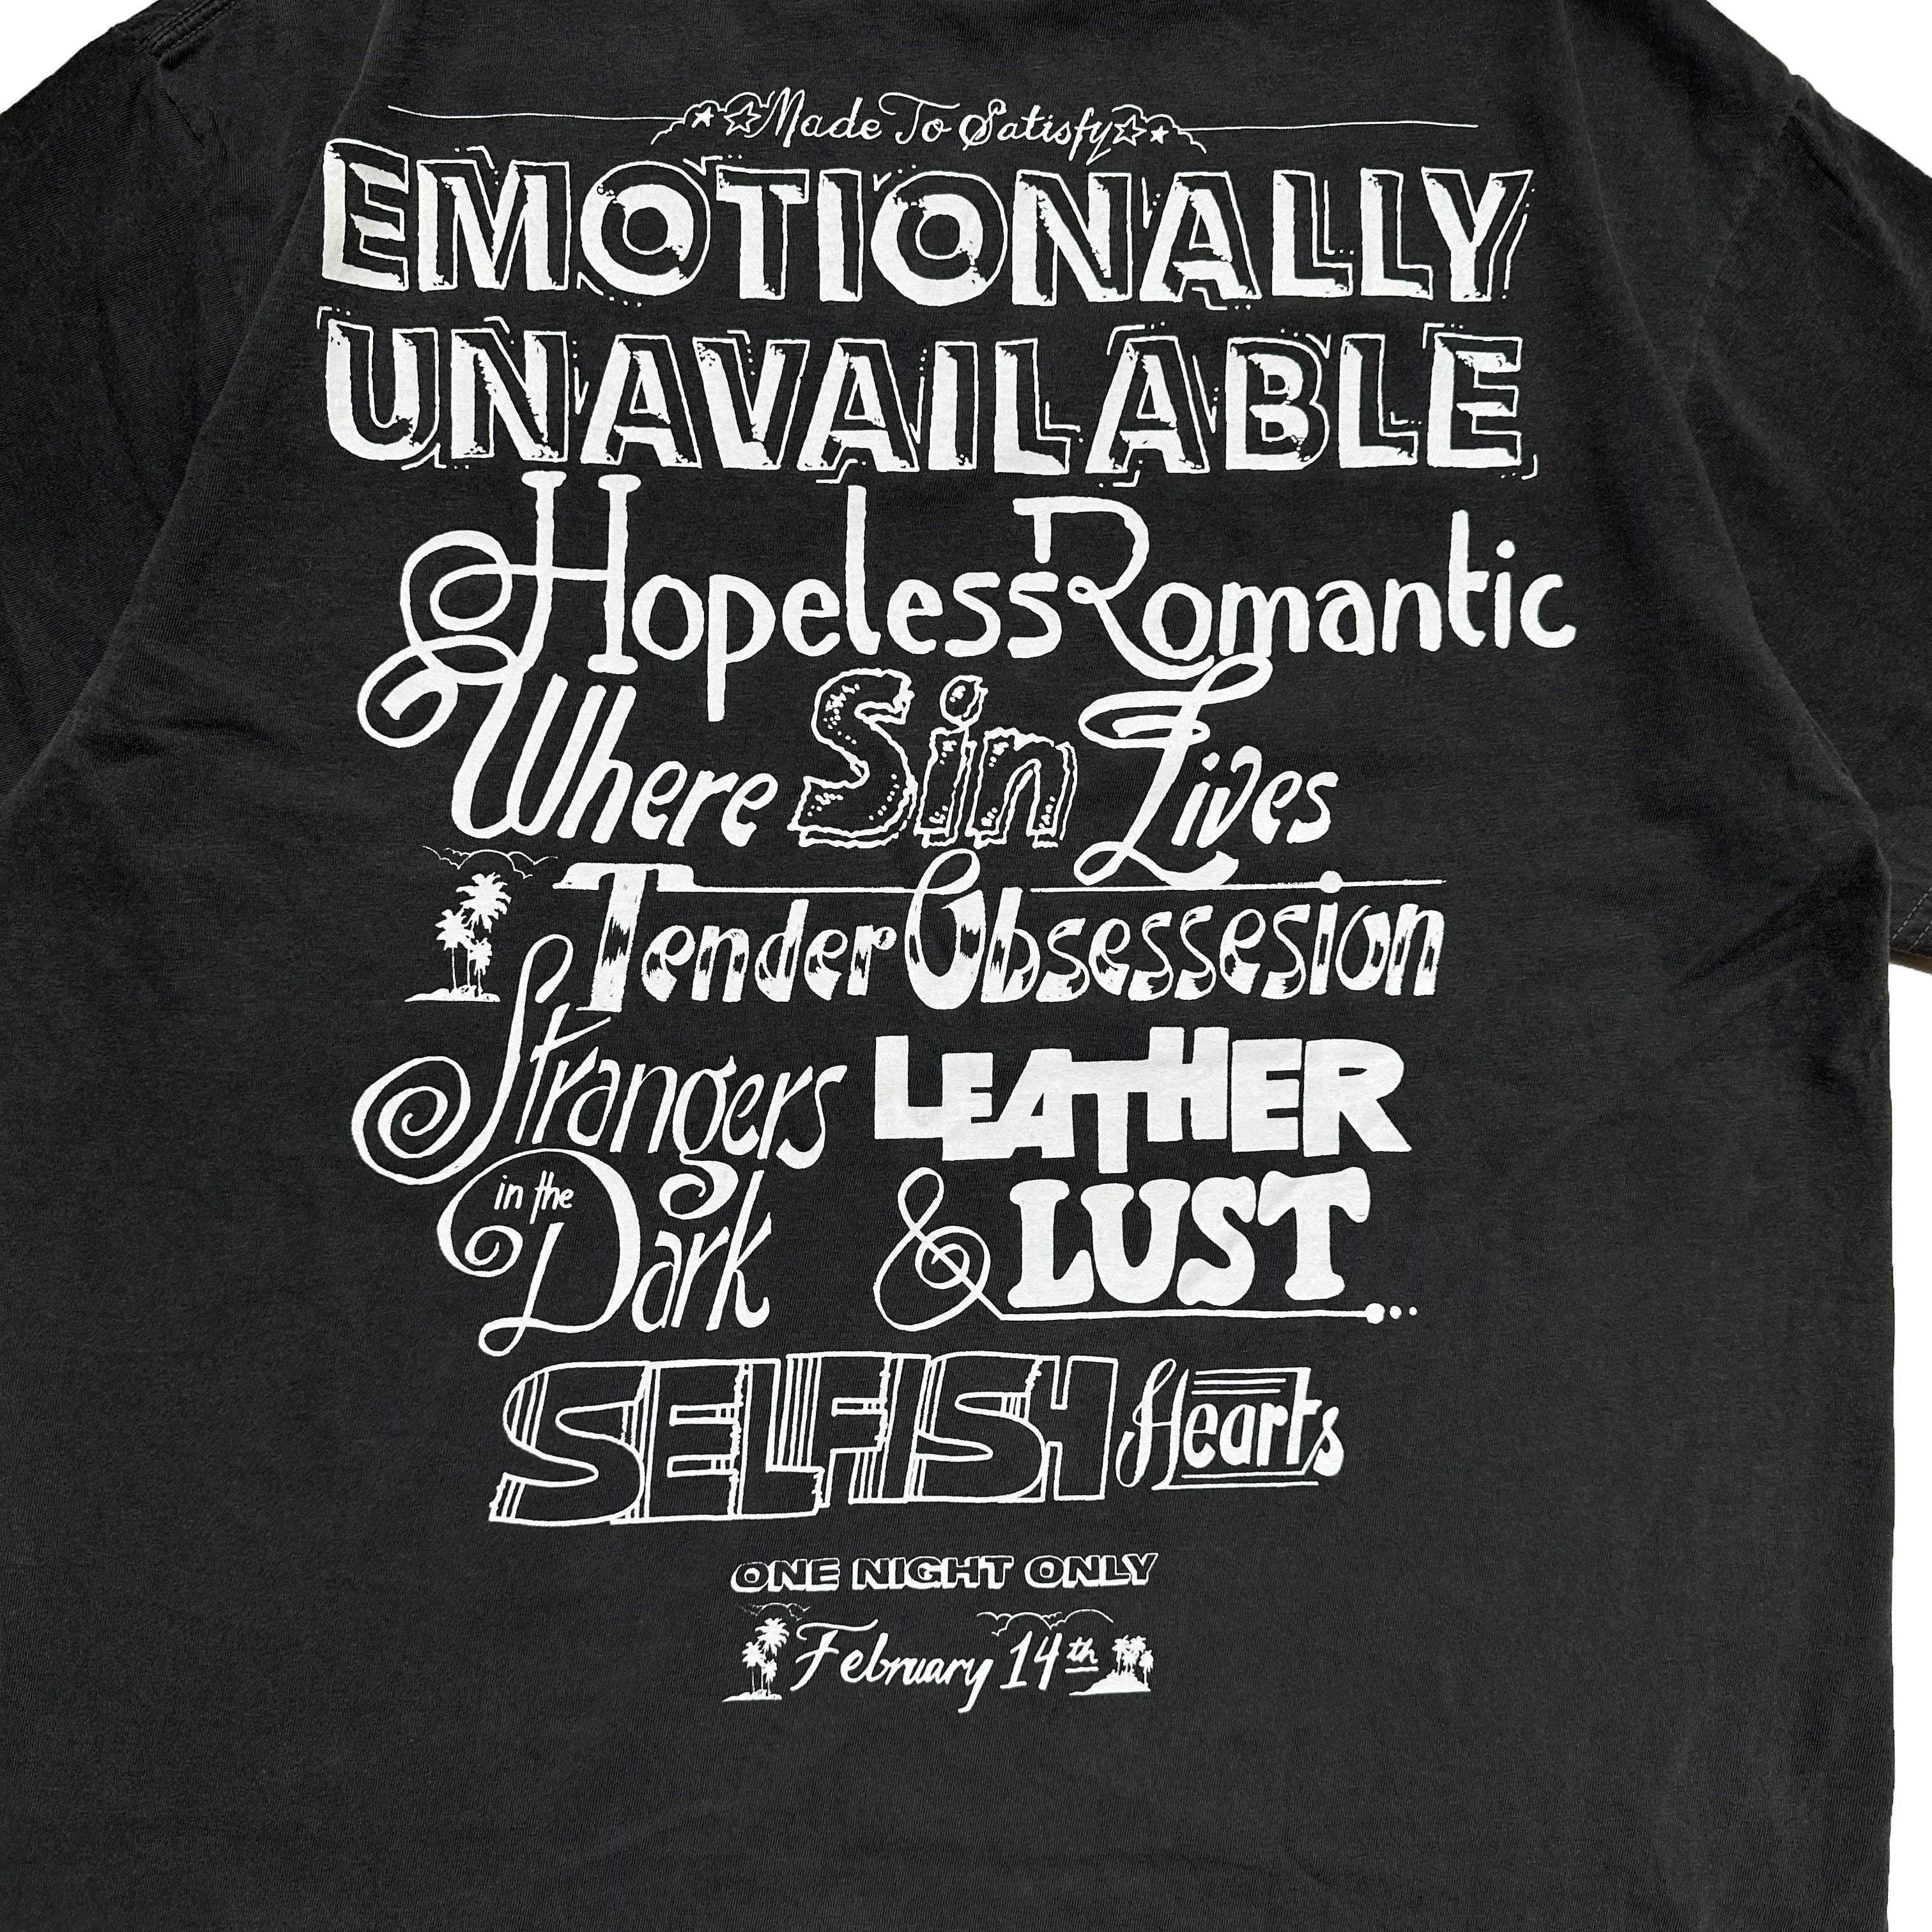 Emotionaly Unavailable / FEBRUARY 14TH TEE